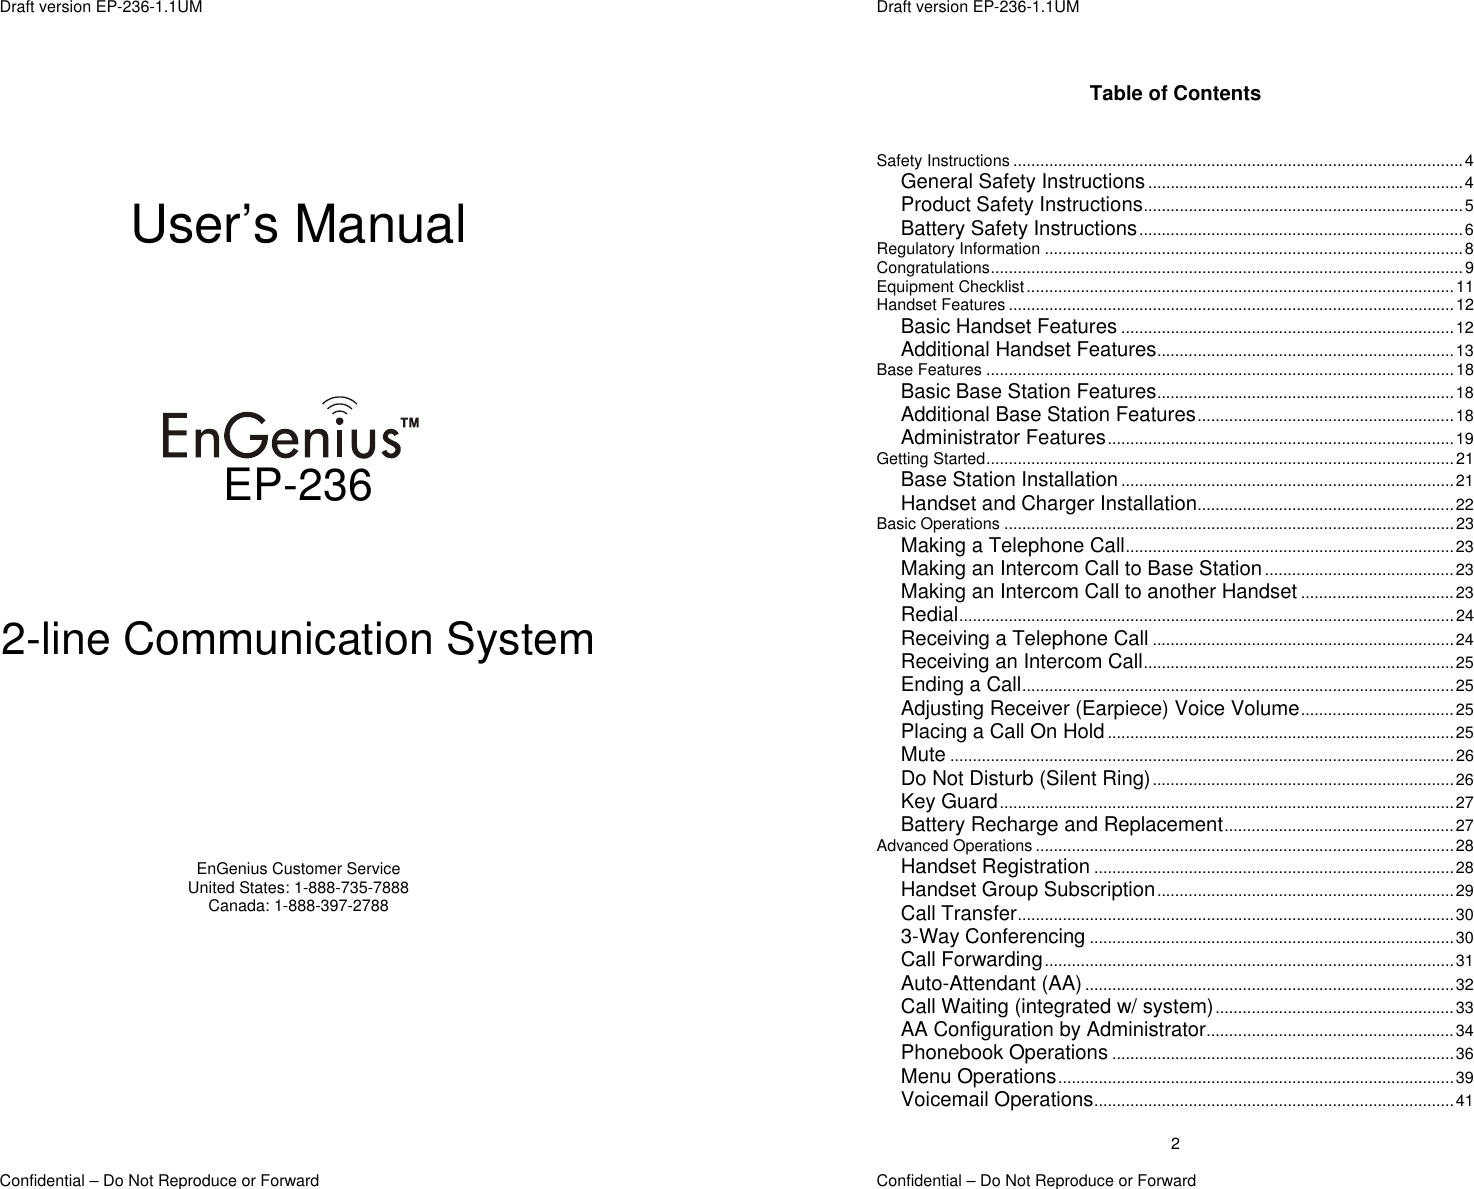  Draft version EP-236-1.1UM Confidential – Do Not Reproduce or Forward       User’s Manual       EP-236   2-line Communication System       EnGenius Customer Service United States: 1-888-735-7888 Canada: 1-888-397-2788  Draft version EP-236-1.1UM   Confidential – Do Not Reproduce or Forward 2Table of Contents   Safety Instructions ....................................................................................................4 General Safety Instructions ......................................................................4 Product Safety Instructions.......................................................................5 Battery Safety Instructions........................................................................6 Regulatory Information .............................................................................................8 Congratulations.........................................................................................................9 Equipment Checklist...............................................................................................11 Handset Features ...................................................................................................12 Basic Handset Features ..........................................................................12 Additional Handset Features..................................................................13 Base Features ........................................................................................................18 Basic Base Station Features..................................................................18 Additional Base Station Features.........................................................18 Administrator Features.............................................................................19 Getting Started........................................................................................................21 Base Station Installation ..........................................................................21 Handset and Charger Installation.........................................................22 Basic Operations ....................................................................................................23 Making a Telephone Call.........................................................................23 Making an Intercom Call to Base Station ..........................................23 Making an Intercom Call to another Handset ..................................23 Redial..............................................................................................................24 Receiving a Telephone Call ...................................................................24 Receiving an Intercom Call.....................................................................25 Ending a Call................................................................................................25 Adjusting Receiver (Earpiece) Voice Volume..................................25 Placing a Call On Hold.............................................................................25 Mute ................................................................................................................26 Do Not Disturb (Silent Ring)...................................................................26 Key Guard.....................................................................................................27 Battery Recharge and Replacement...................................................27 Advanced Operations .............................................................................................28 Handset Registration ................................................................................28 Handset Group Subscription..................................................................29 Call Transfer.................................................................................................30 3-Way Conferencing .................................................................................30 Call Forwarding...........................................................................................31 Auto-Attendant (AA) ..................................................................................32 Call Waiting (integrated w/ system).....................................................33 AA Configuration by Administrator.......................................................34 Phonebook Operations ............................................................................36 Menu Operations........................................................................................39 Voicemail Operations................................................................................41 